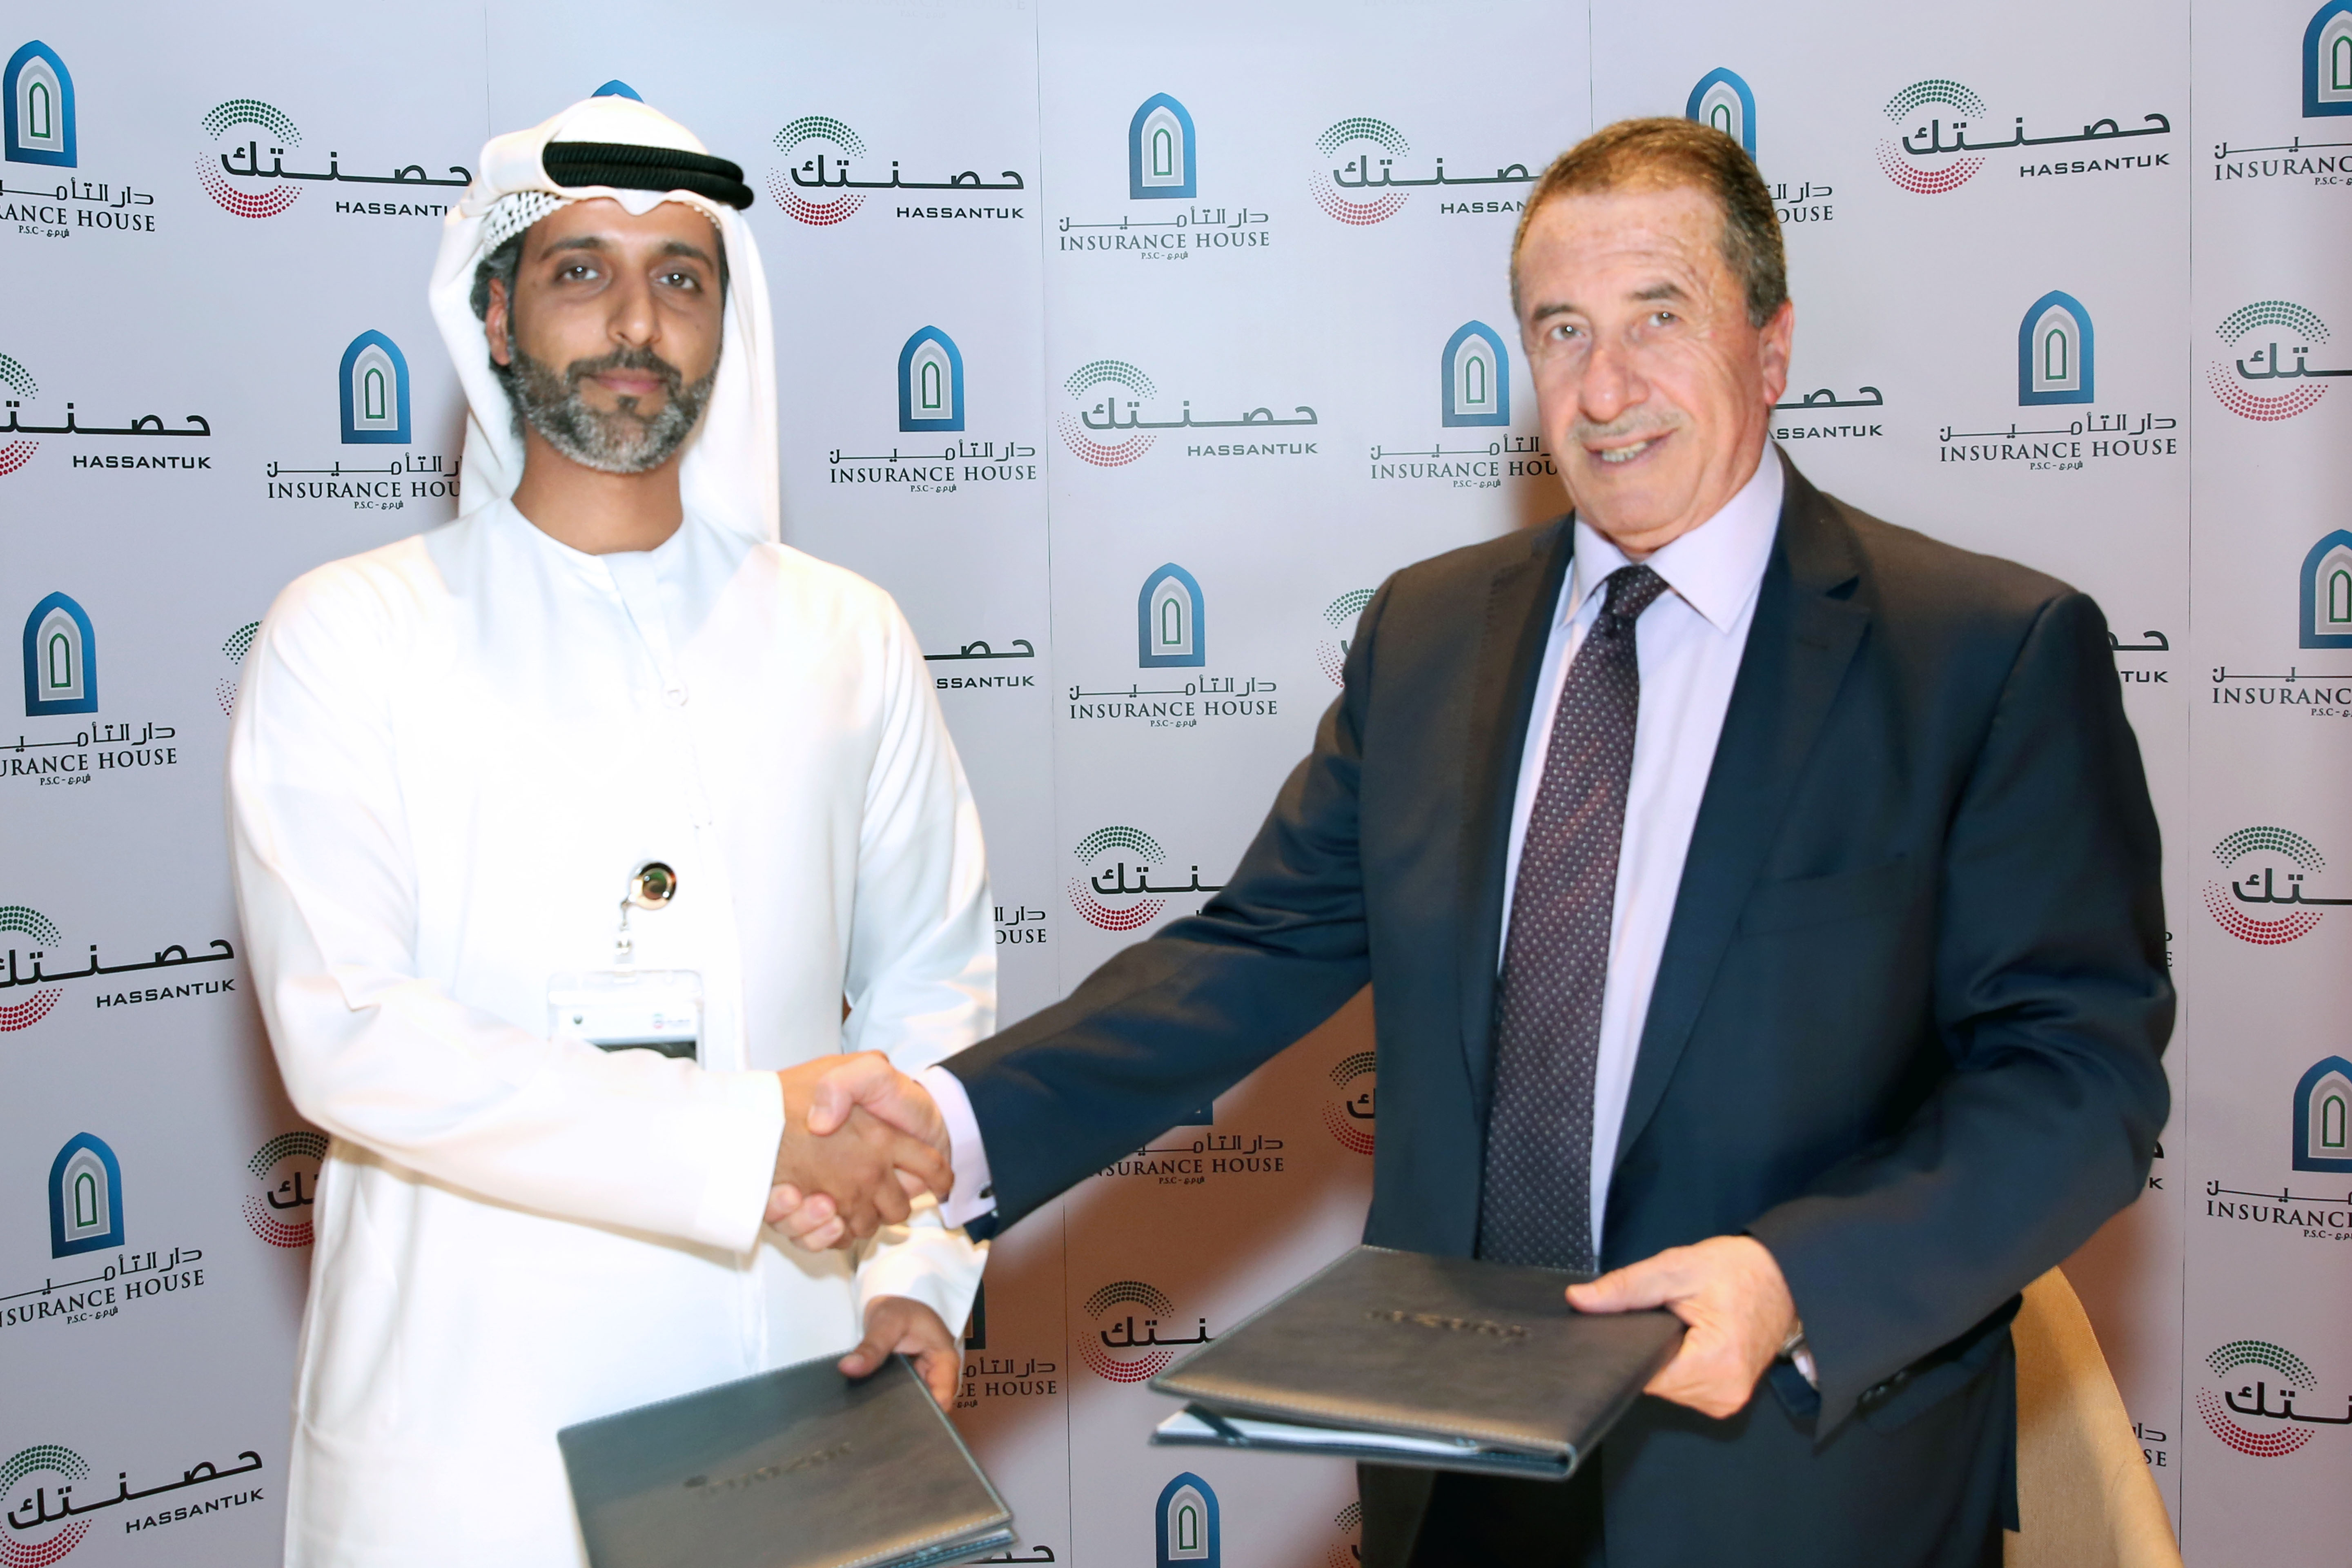 Insurance House partners with Injazat to participate in Hassantuk